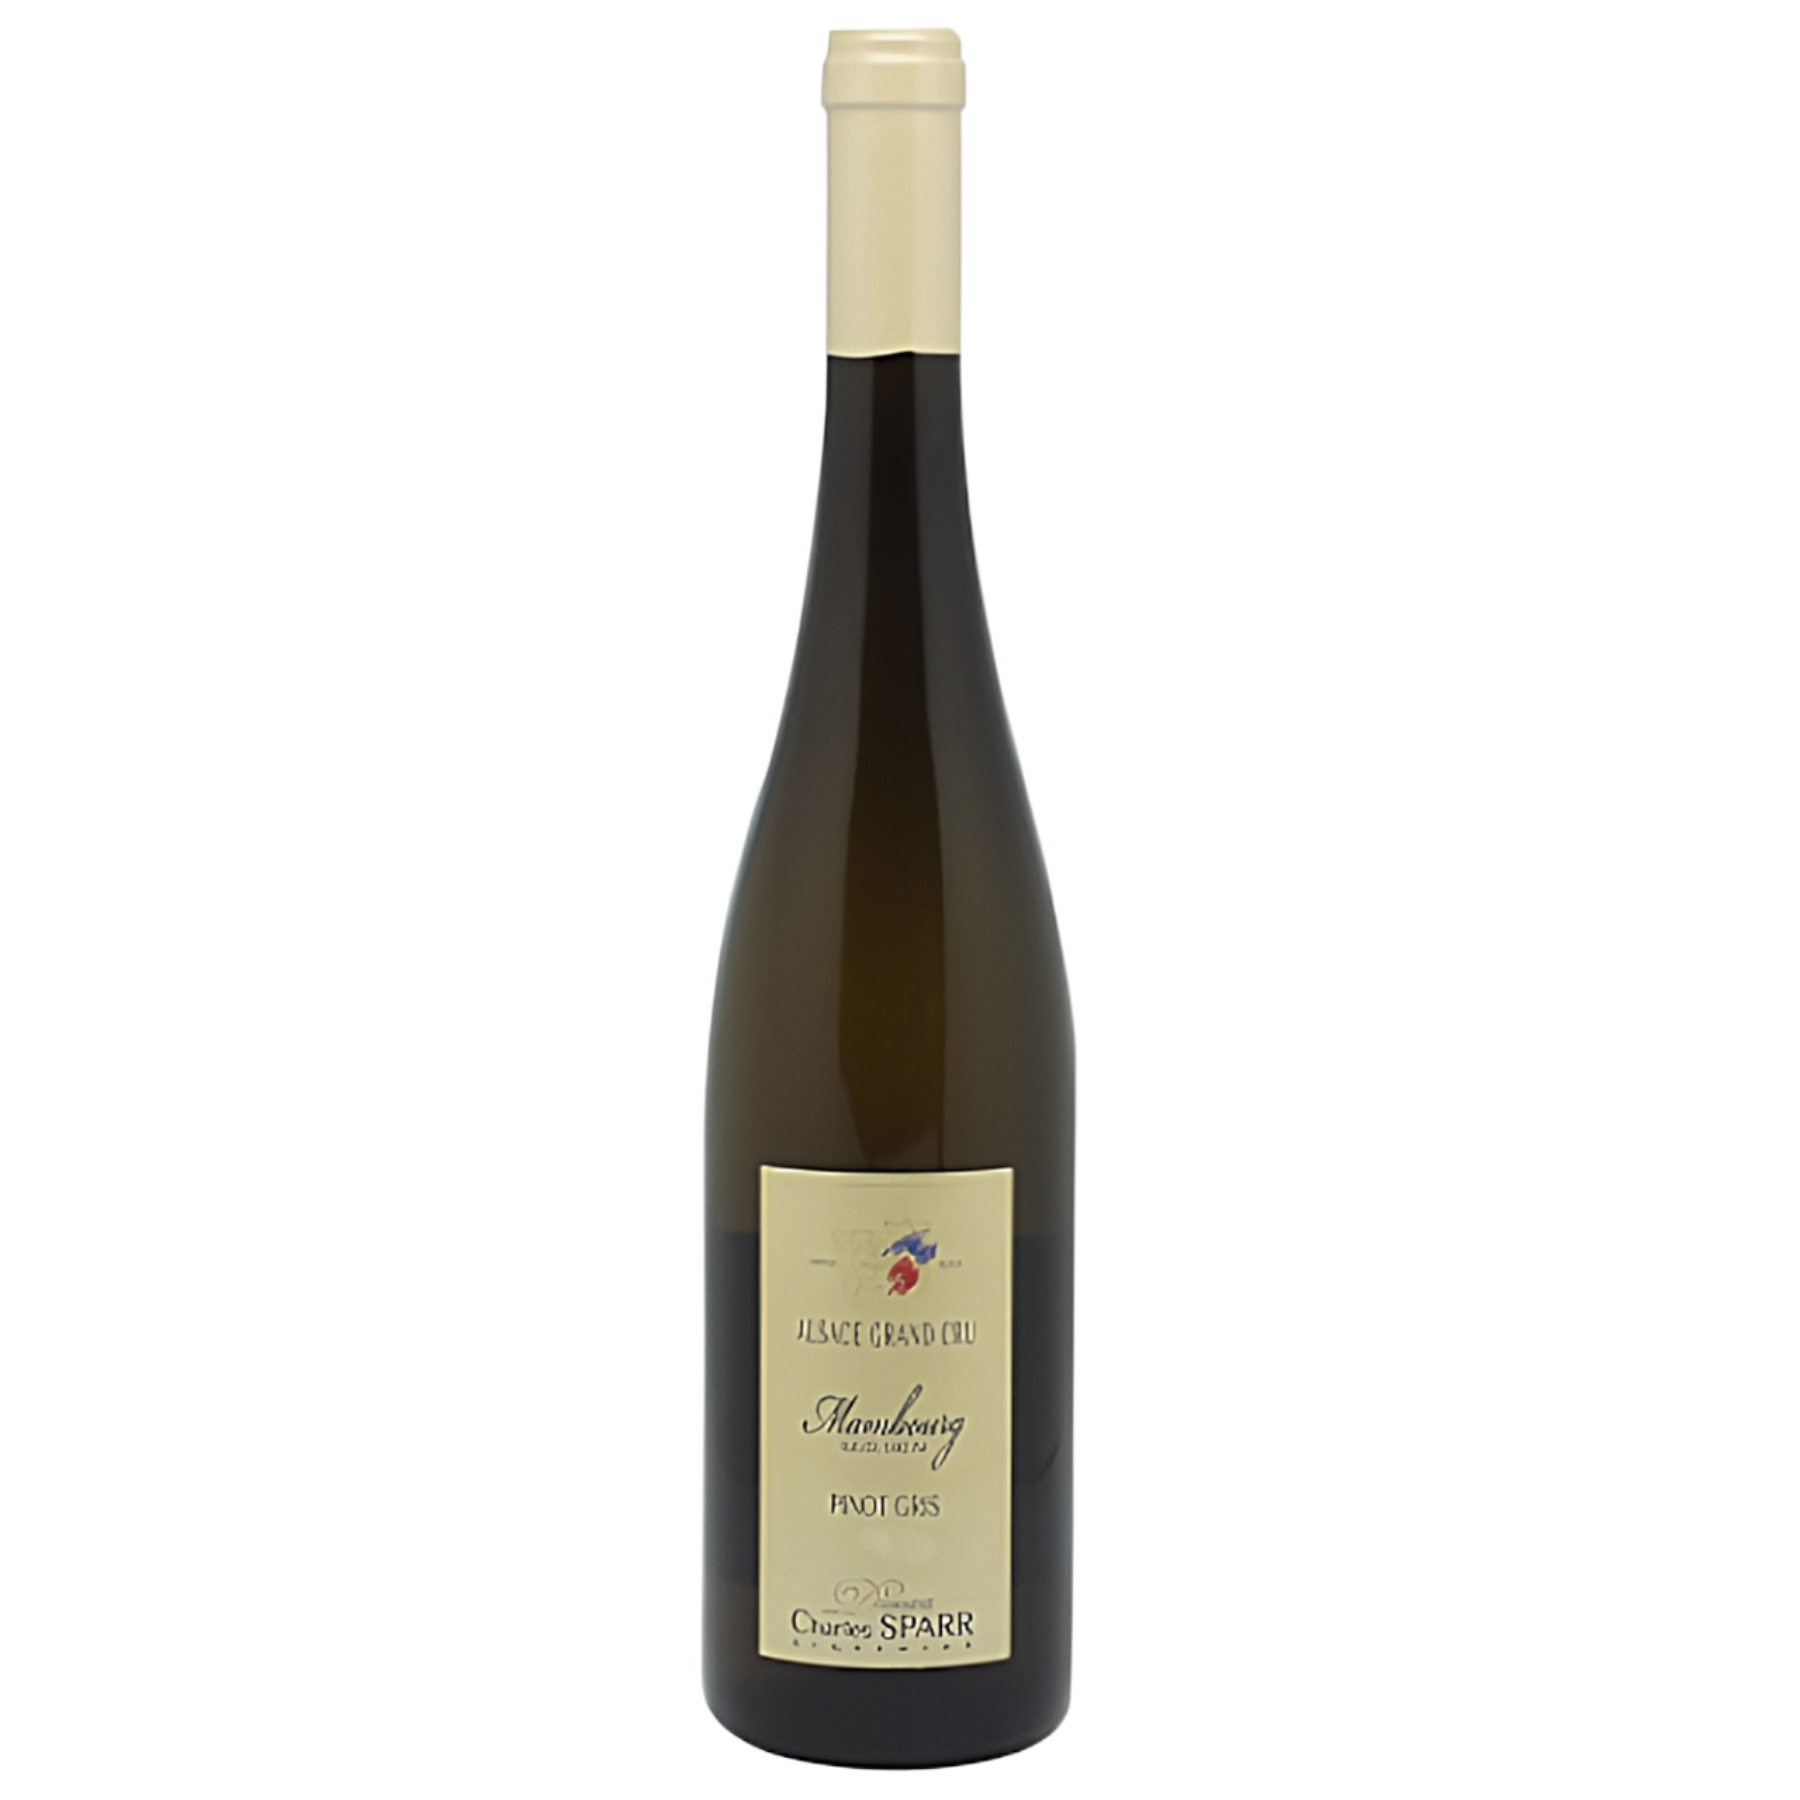 Charles Sparr Pinot Gris Grand Cru Mambourg  White